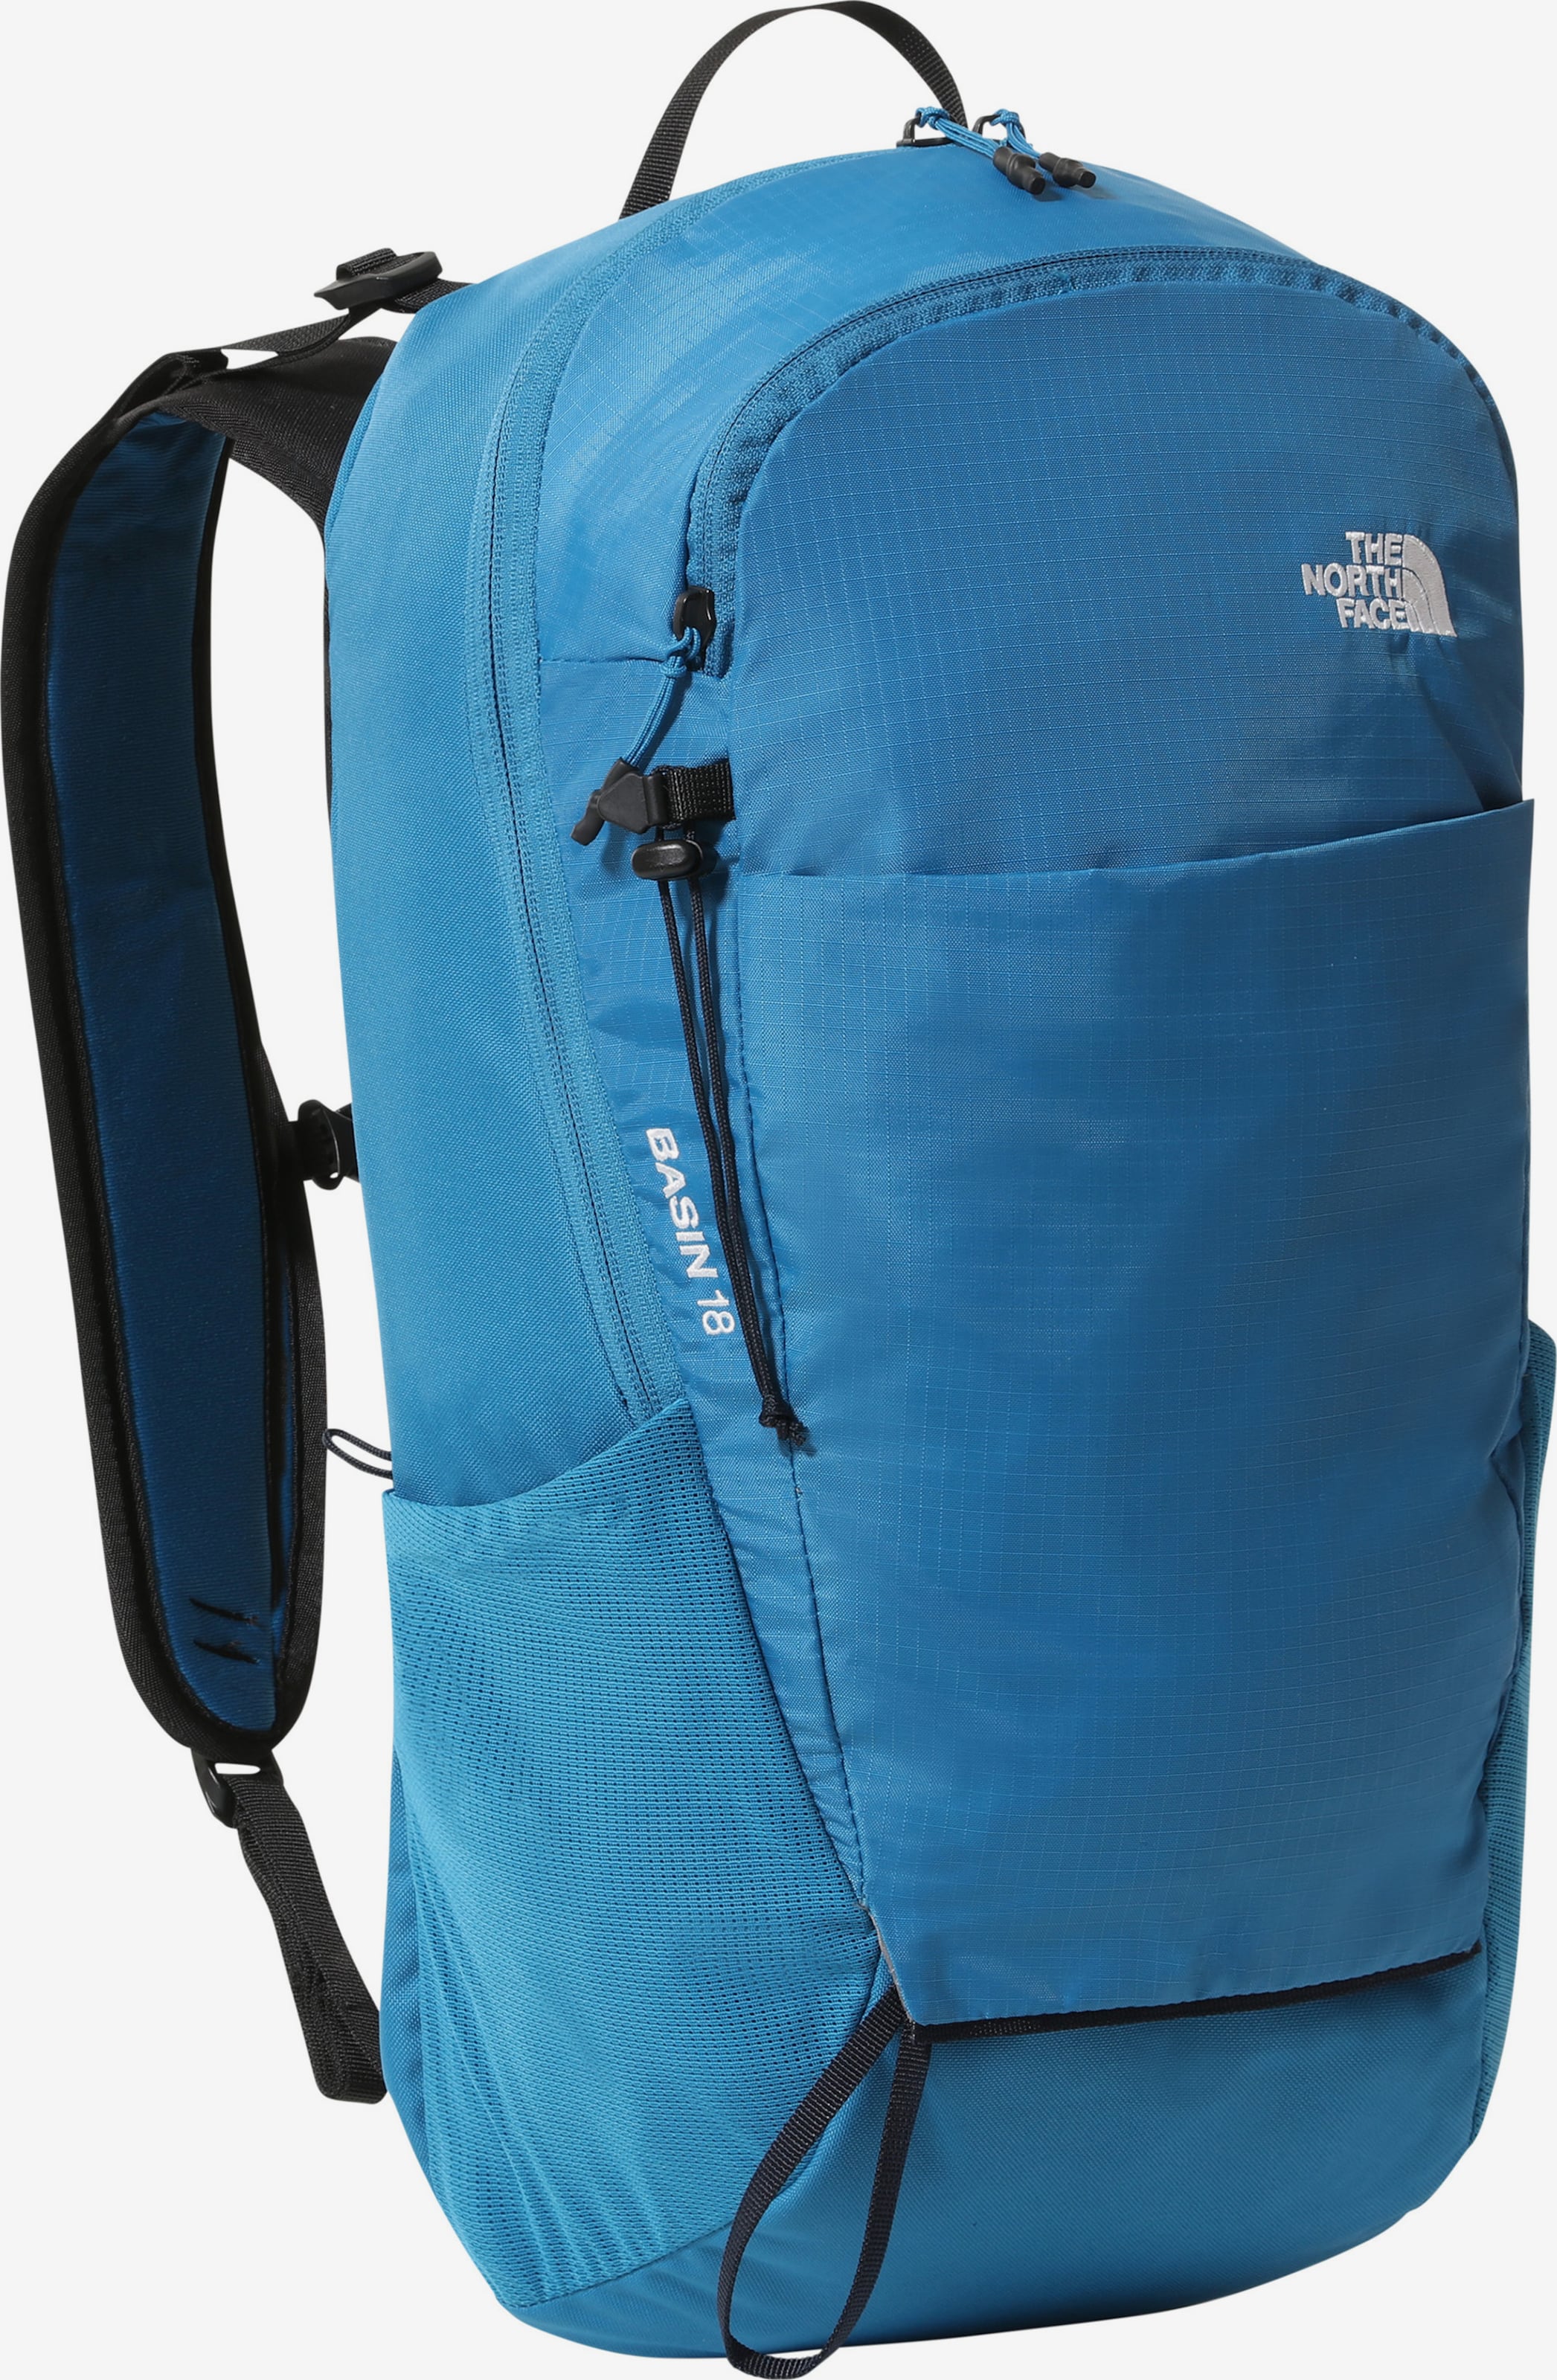 THE NORTH FACE Sportrugzak 'Basin' in Blauw ABOUT YOU